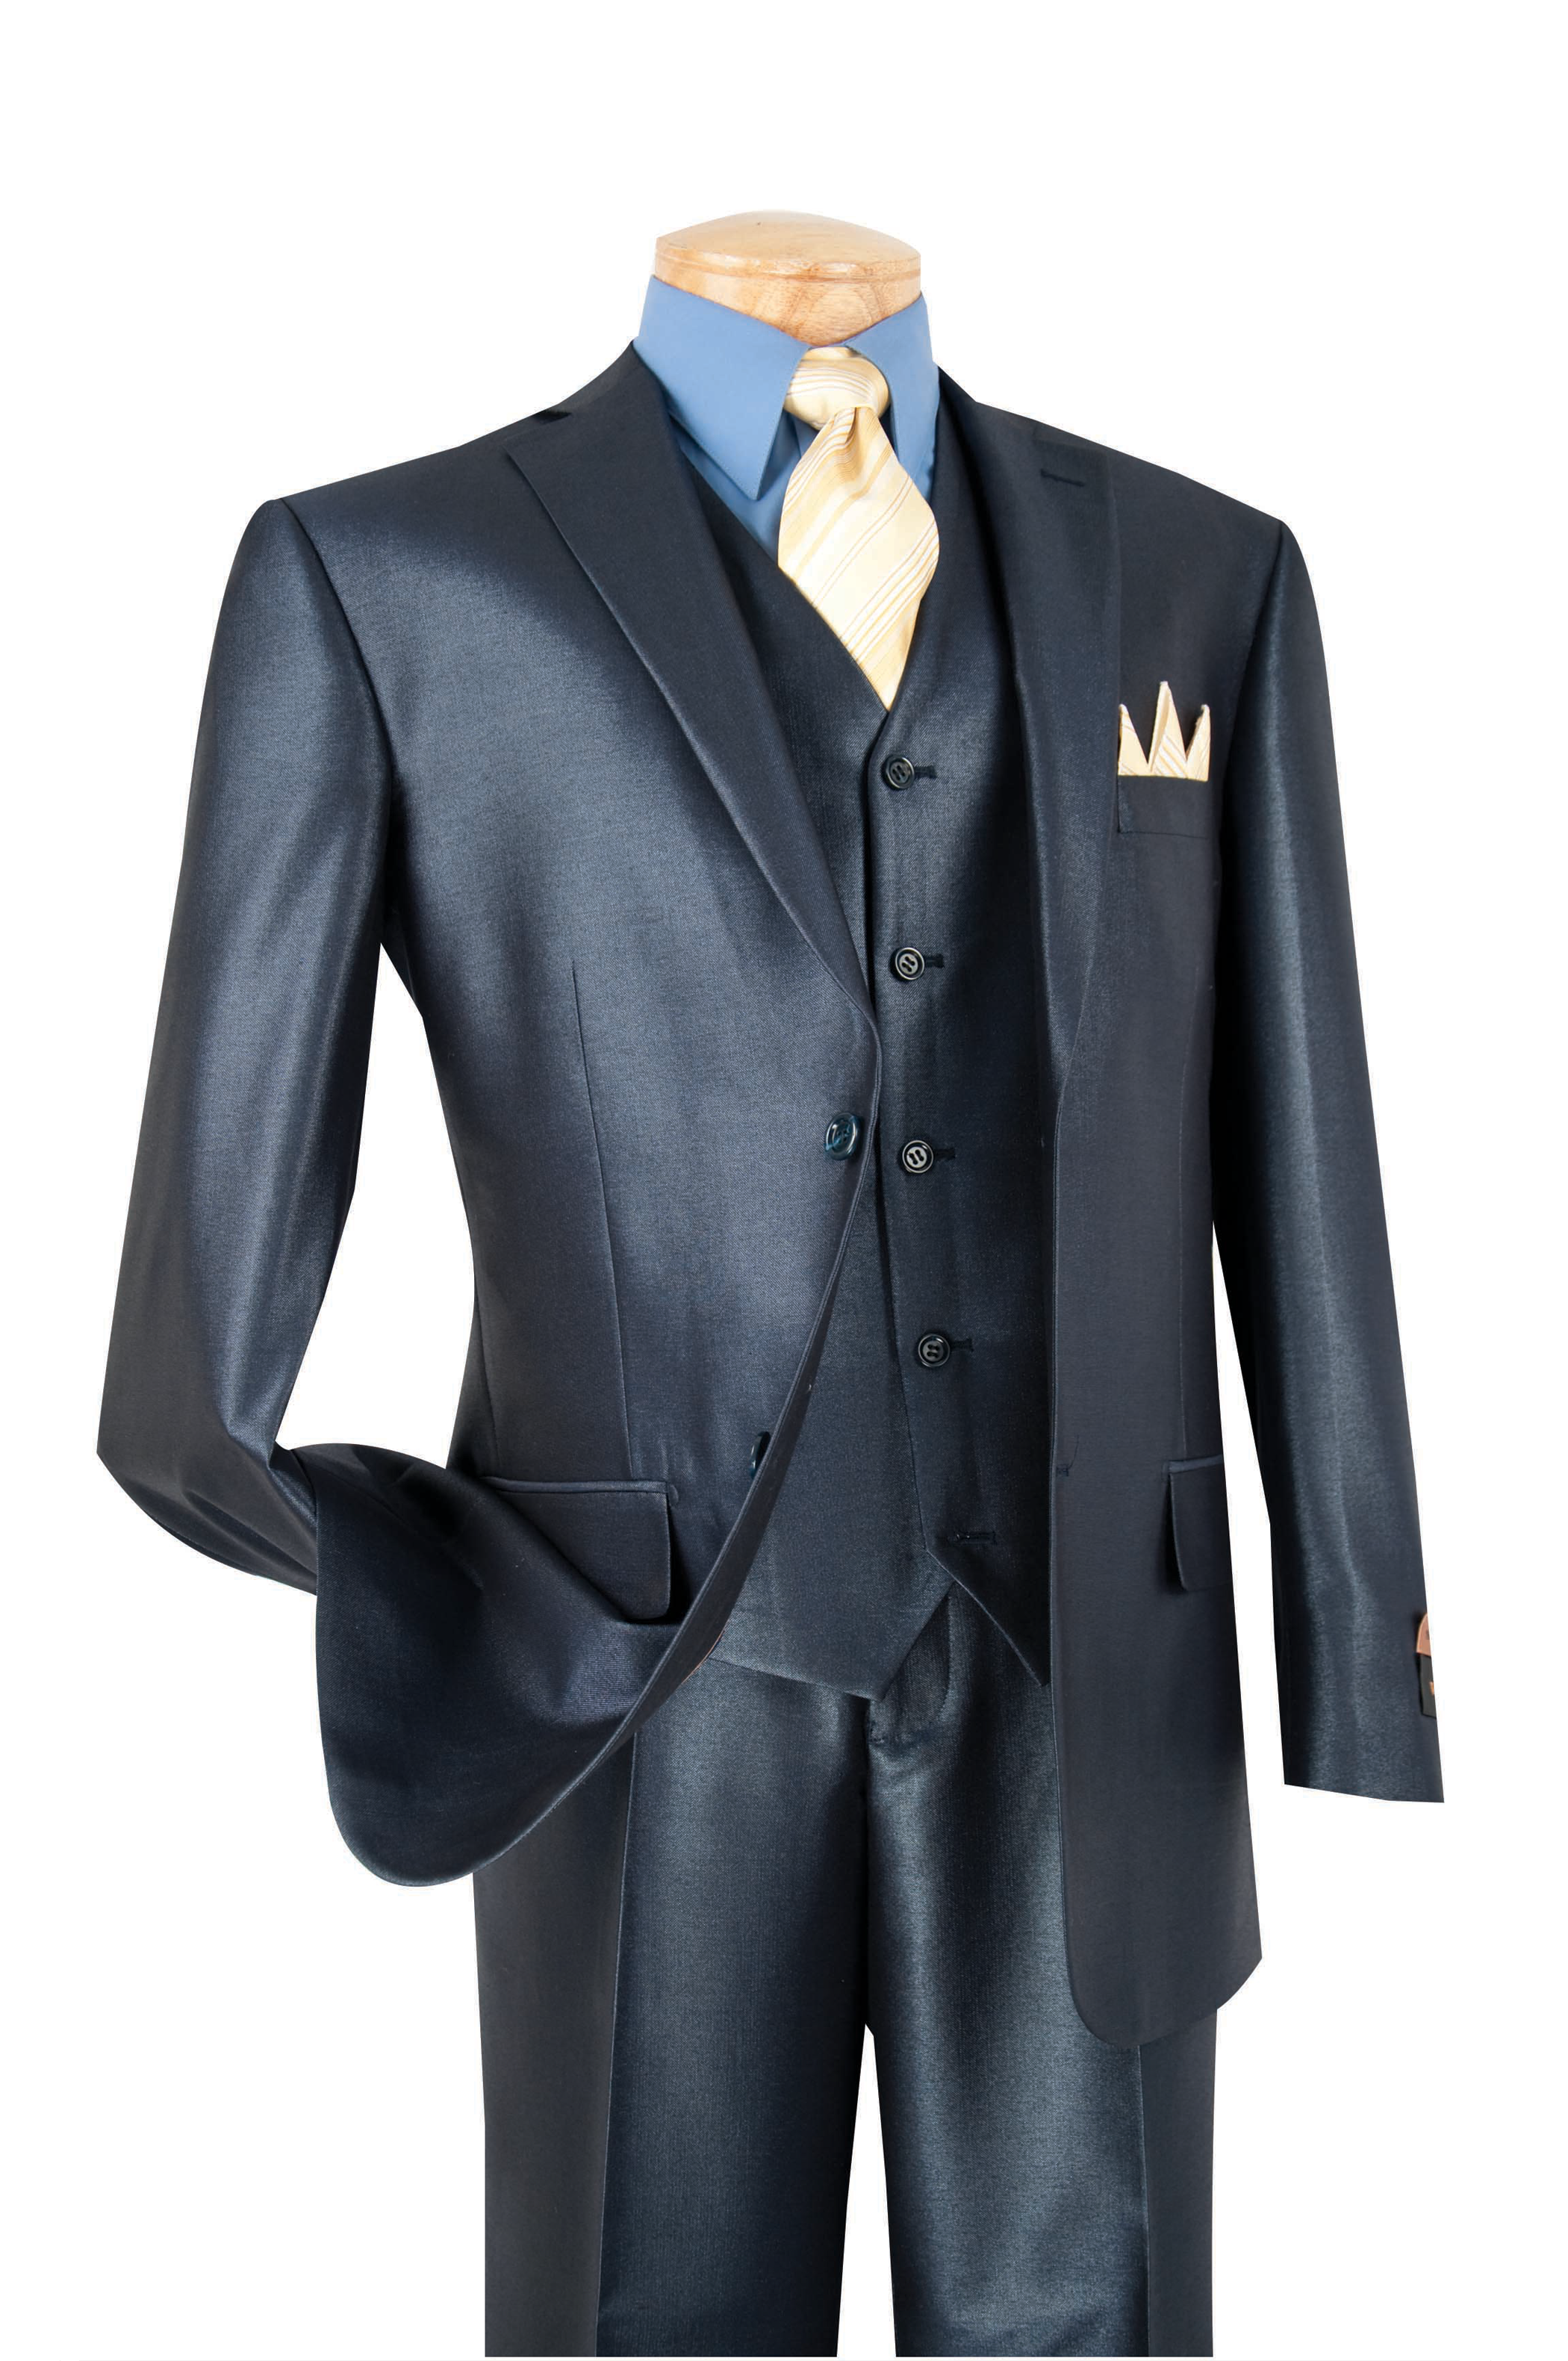 Nautilus Collection - Shiny Regular Fit Men's Suit 3 Piece 2 Button in Midnight Blue